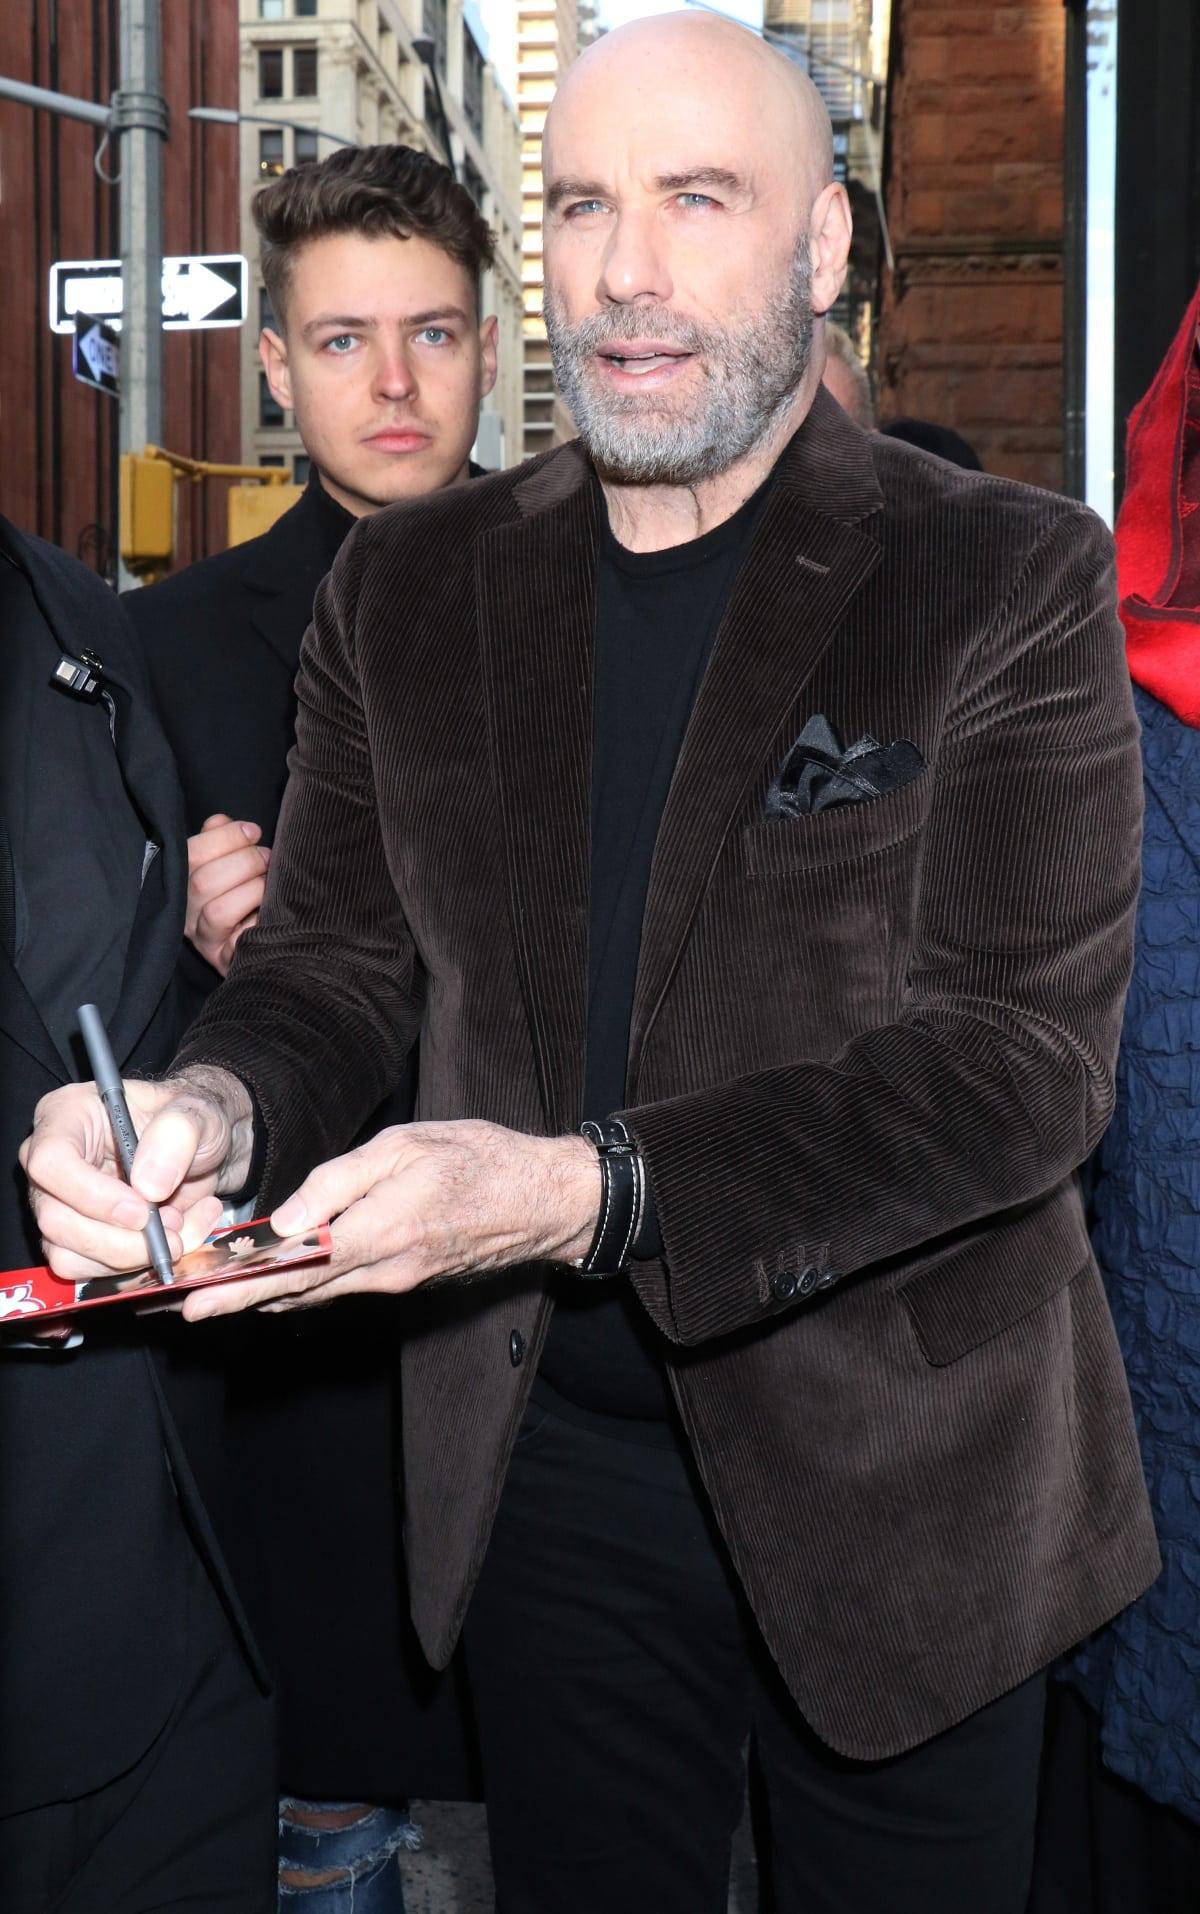 John Travolta signing autographs outside the Build Series studios in New York City